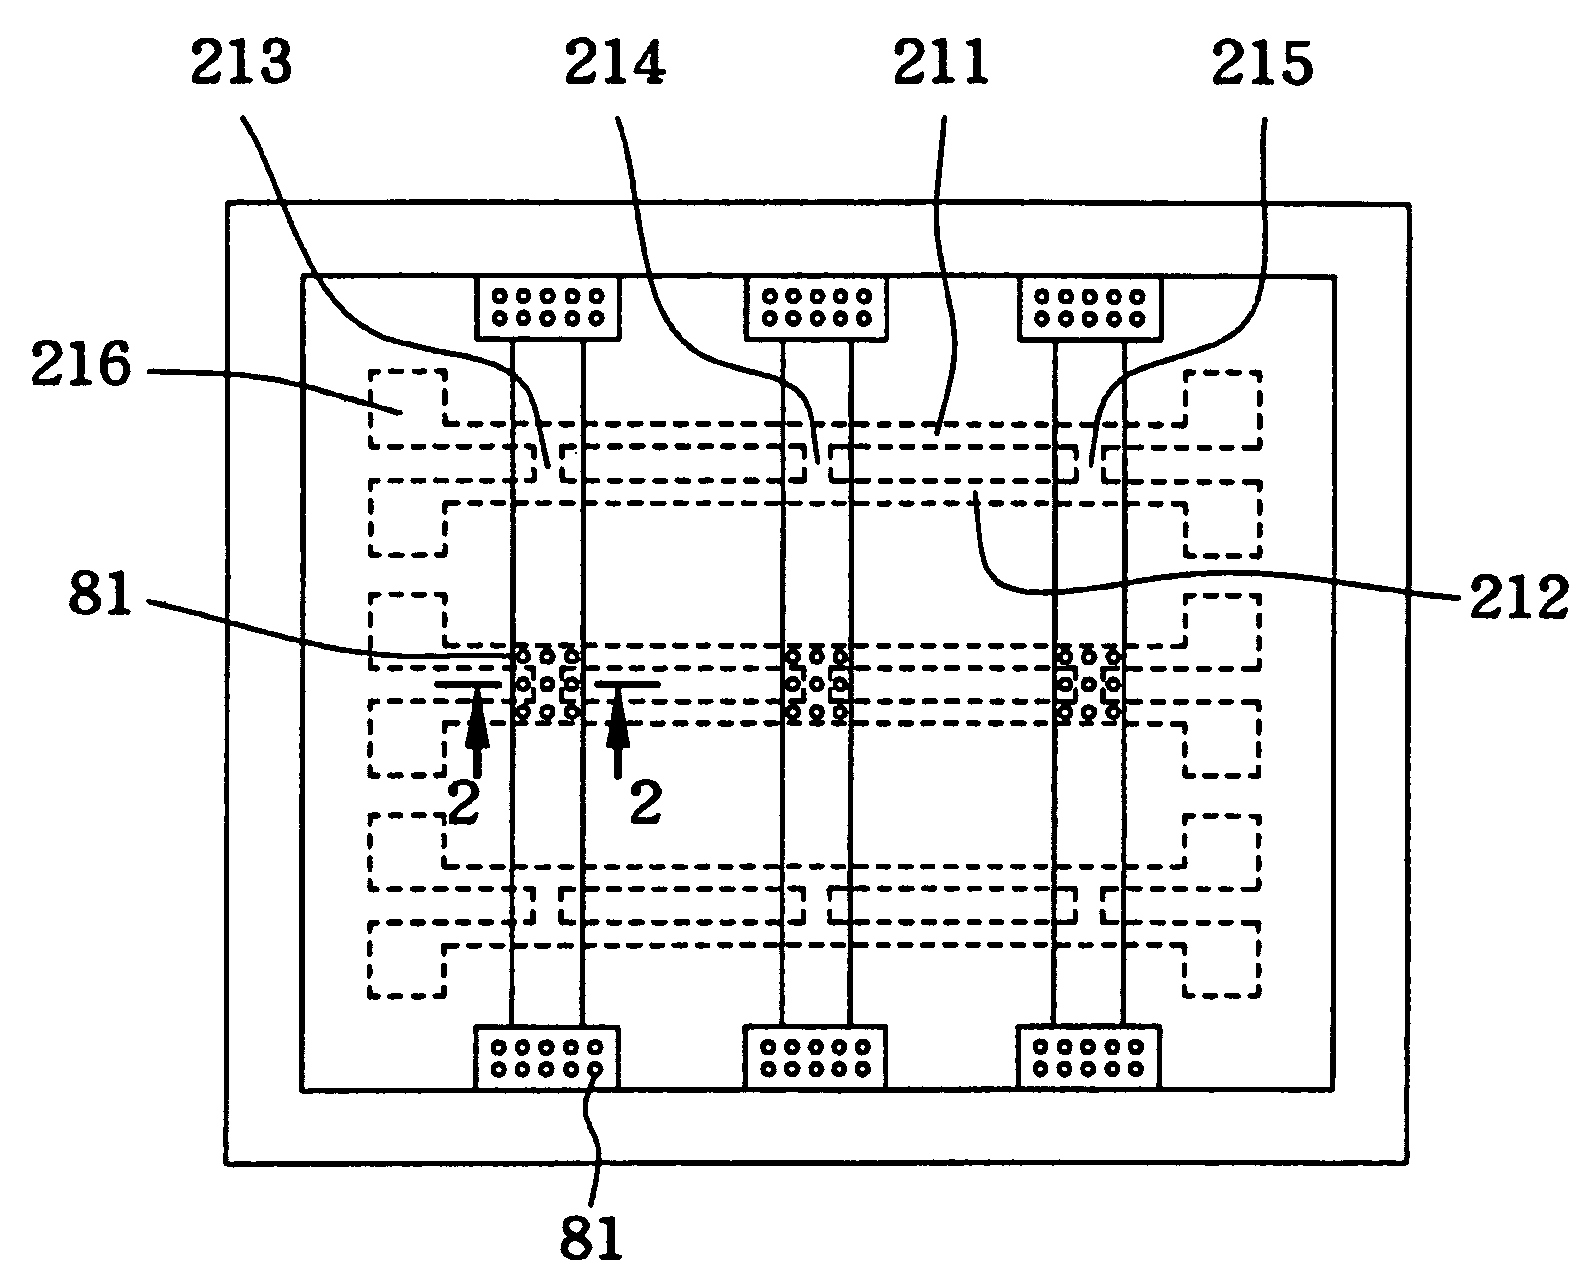 Microfluidic device with network micro channels